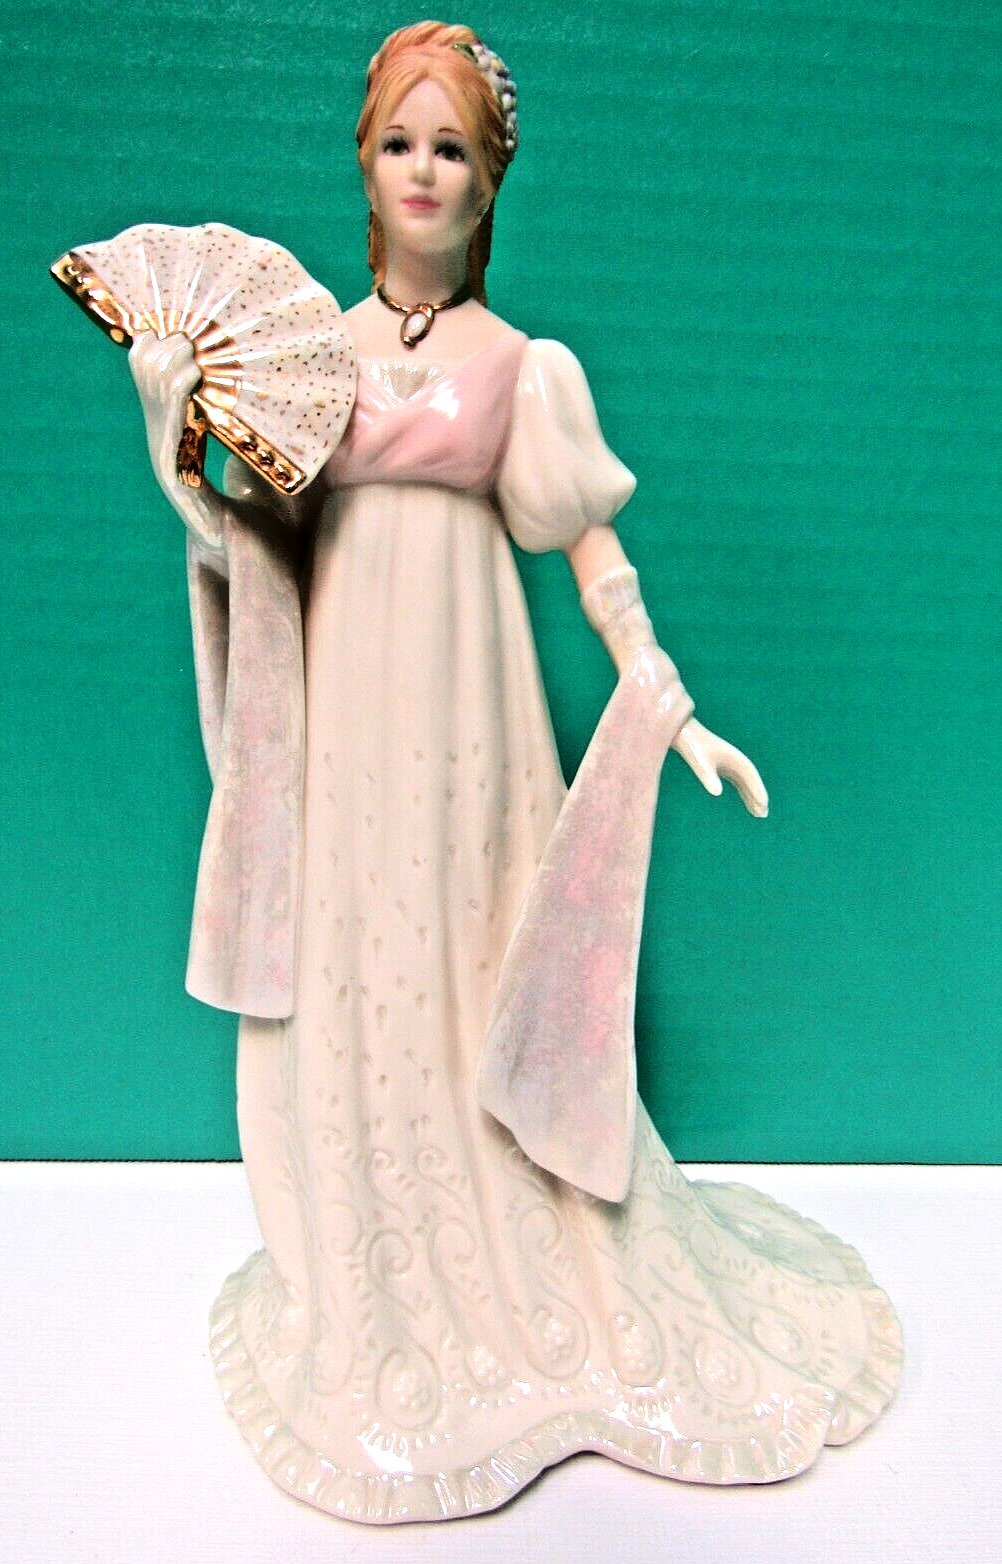 LENOX IVORY GALA at the WHITE HOUSE FIGURINE * GALA FASHIONS - MADE IN SPAIN